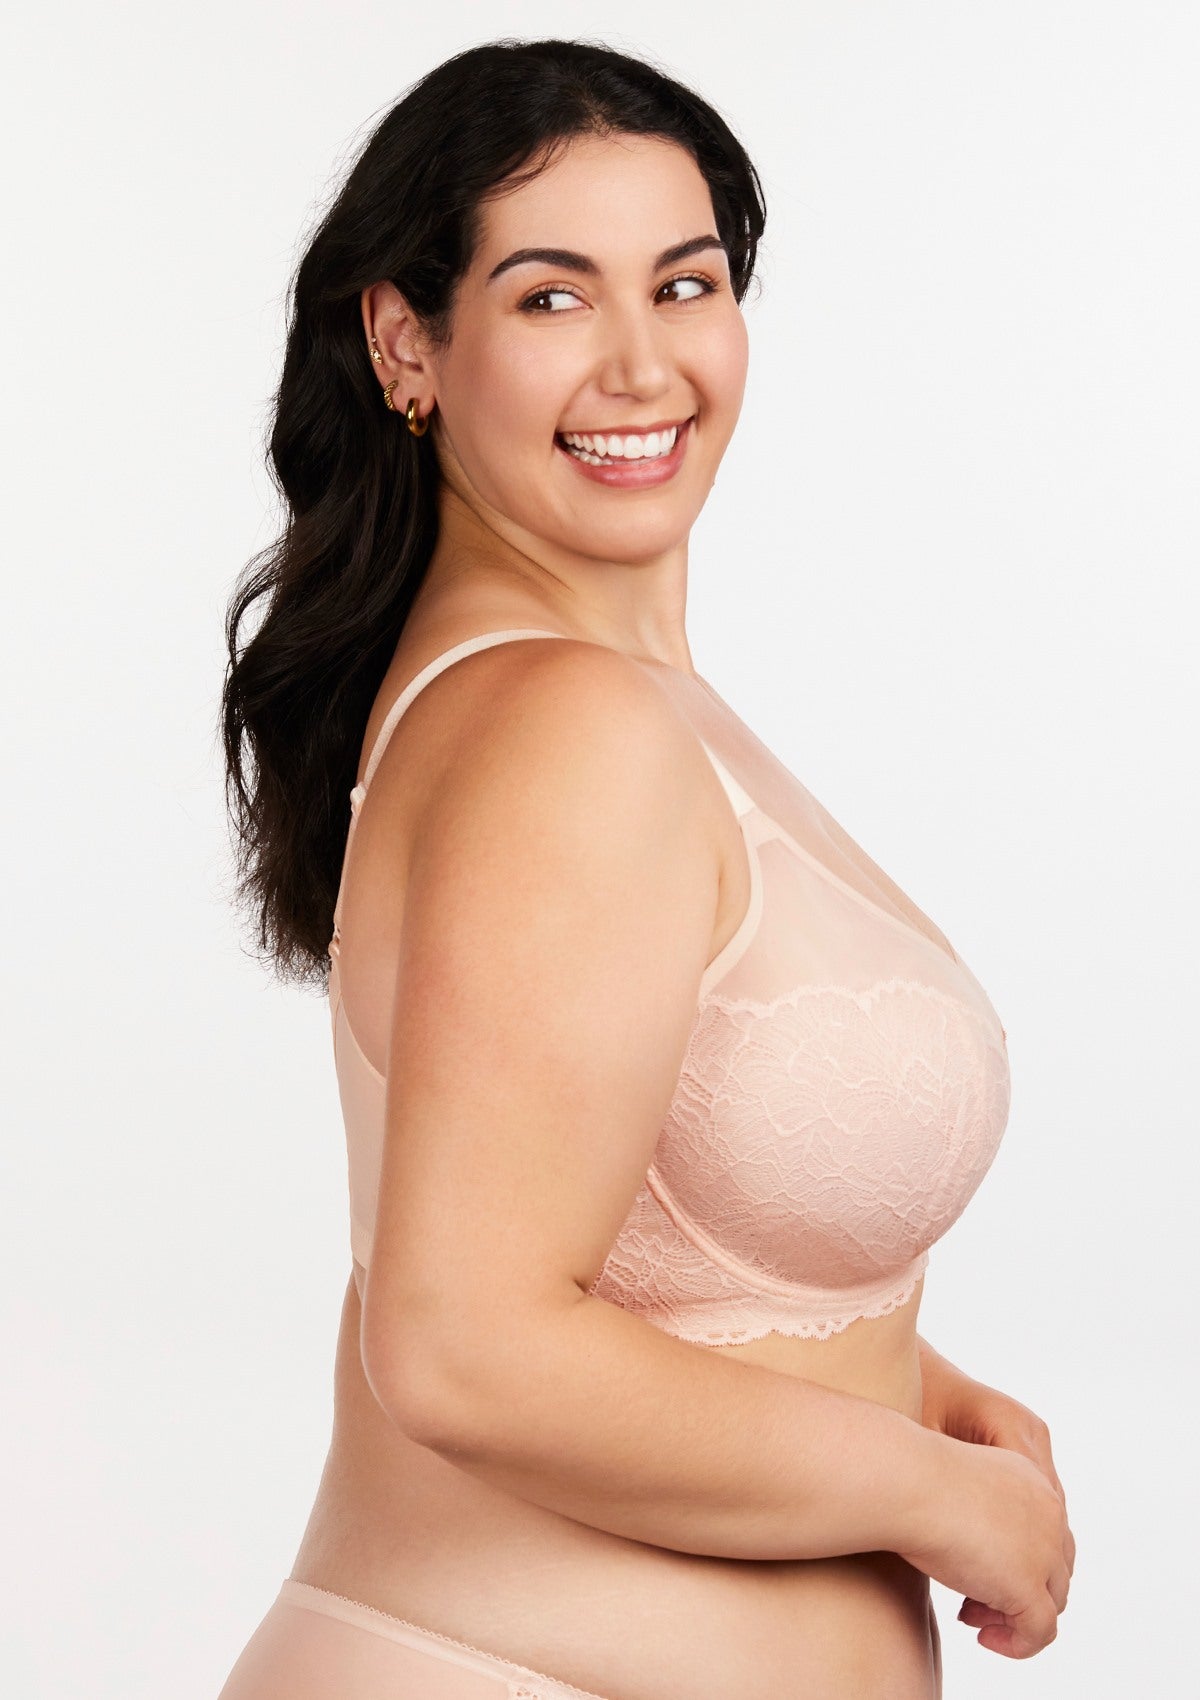 HSIA Blossom Sheer Lace Bra: Comfortable Underwire Bra For Big Busts - Dusty Peach / 34 / H